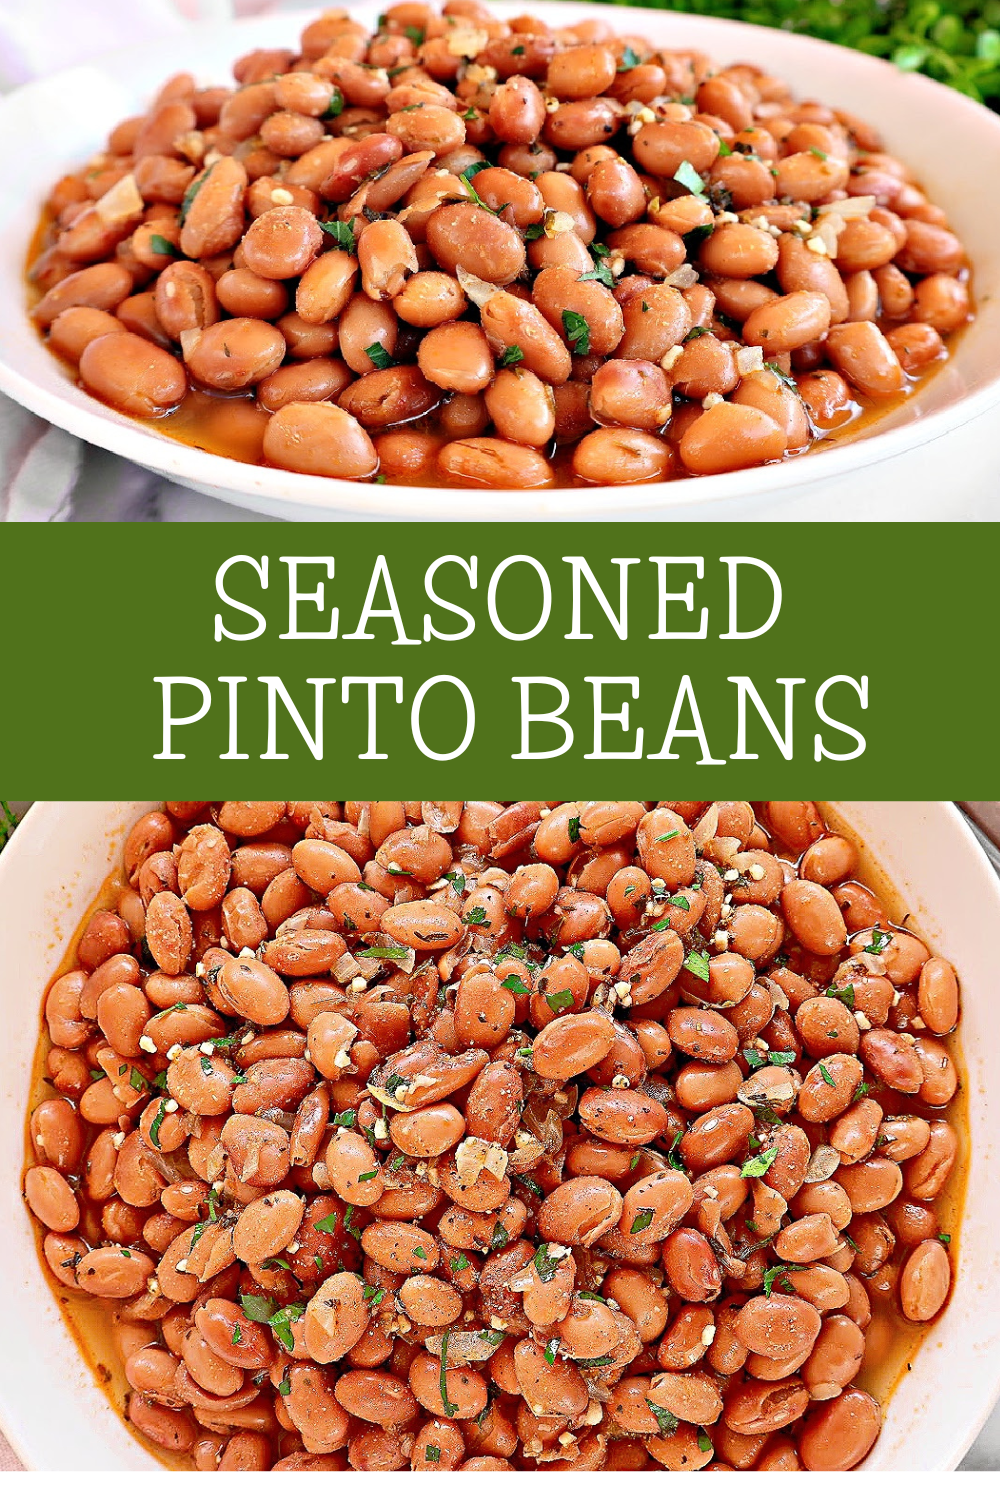 Seasoned Pinto Beans ~ Transform canned pinto beans into a delicious side dish with a savory blend of herbs and spices. via @thiswifecooks